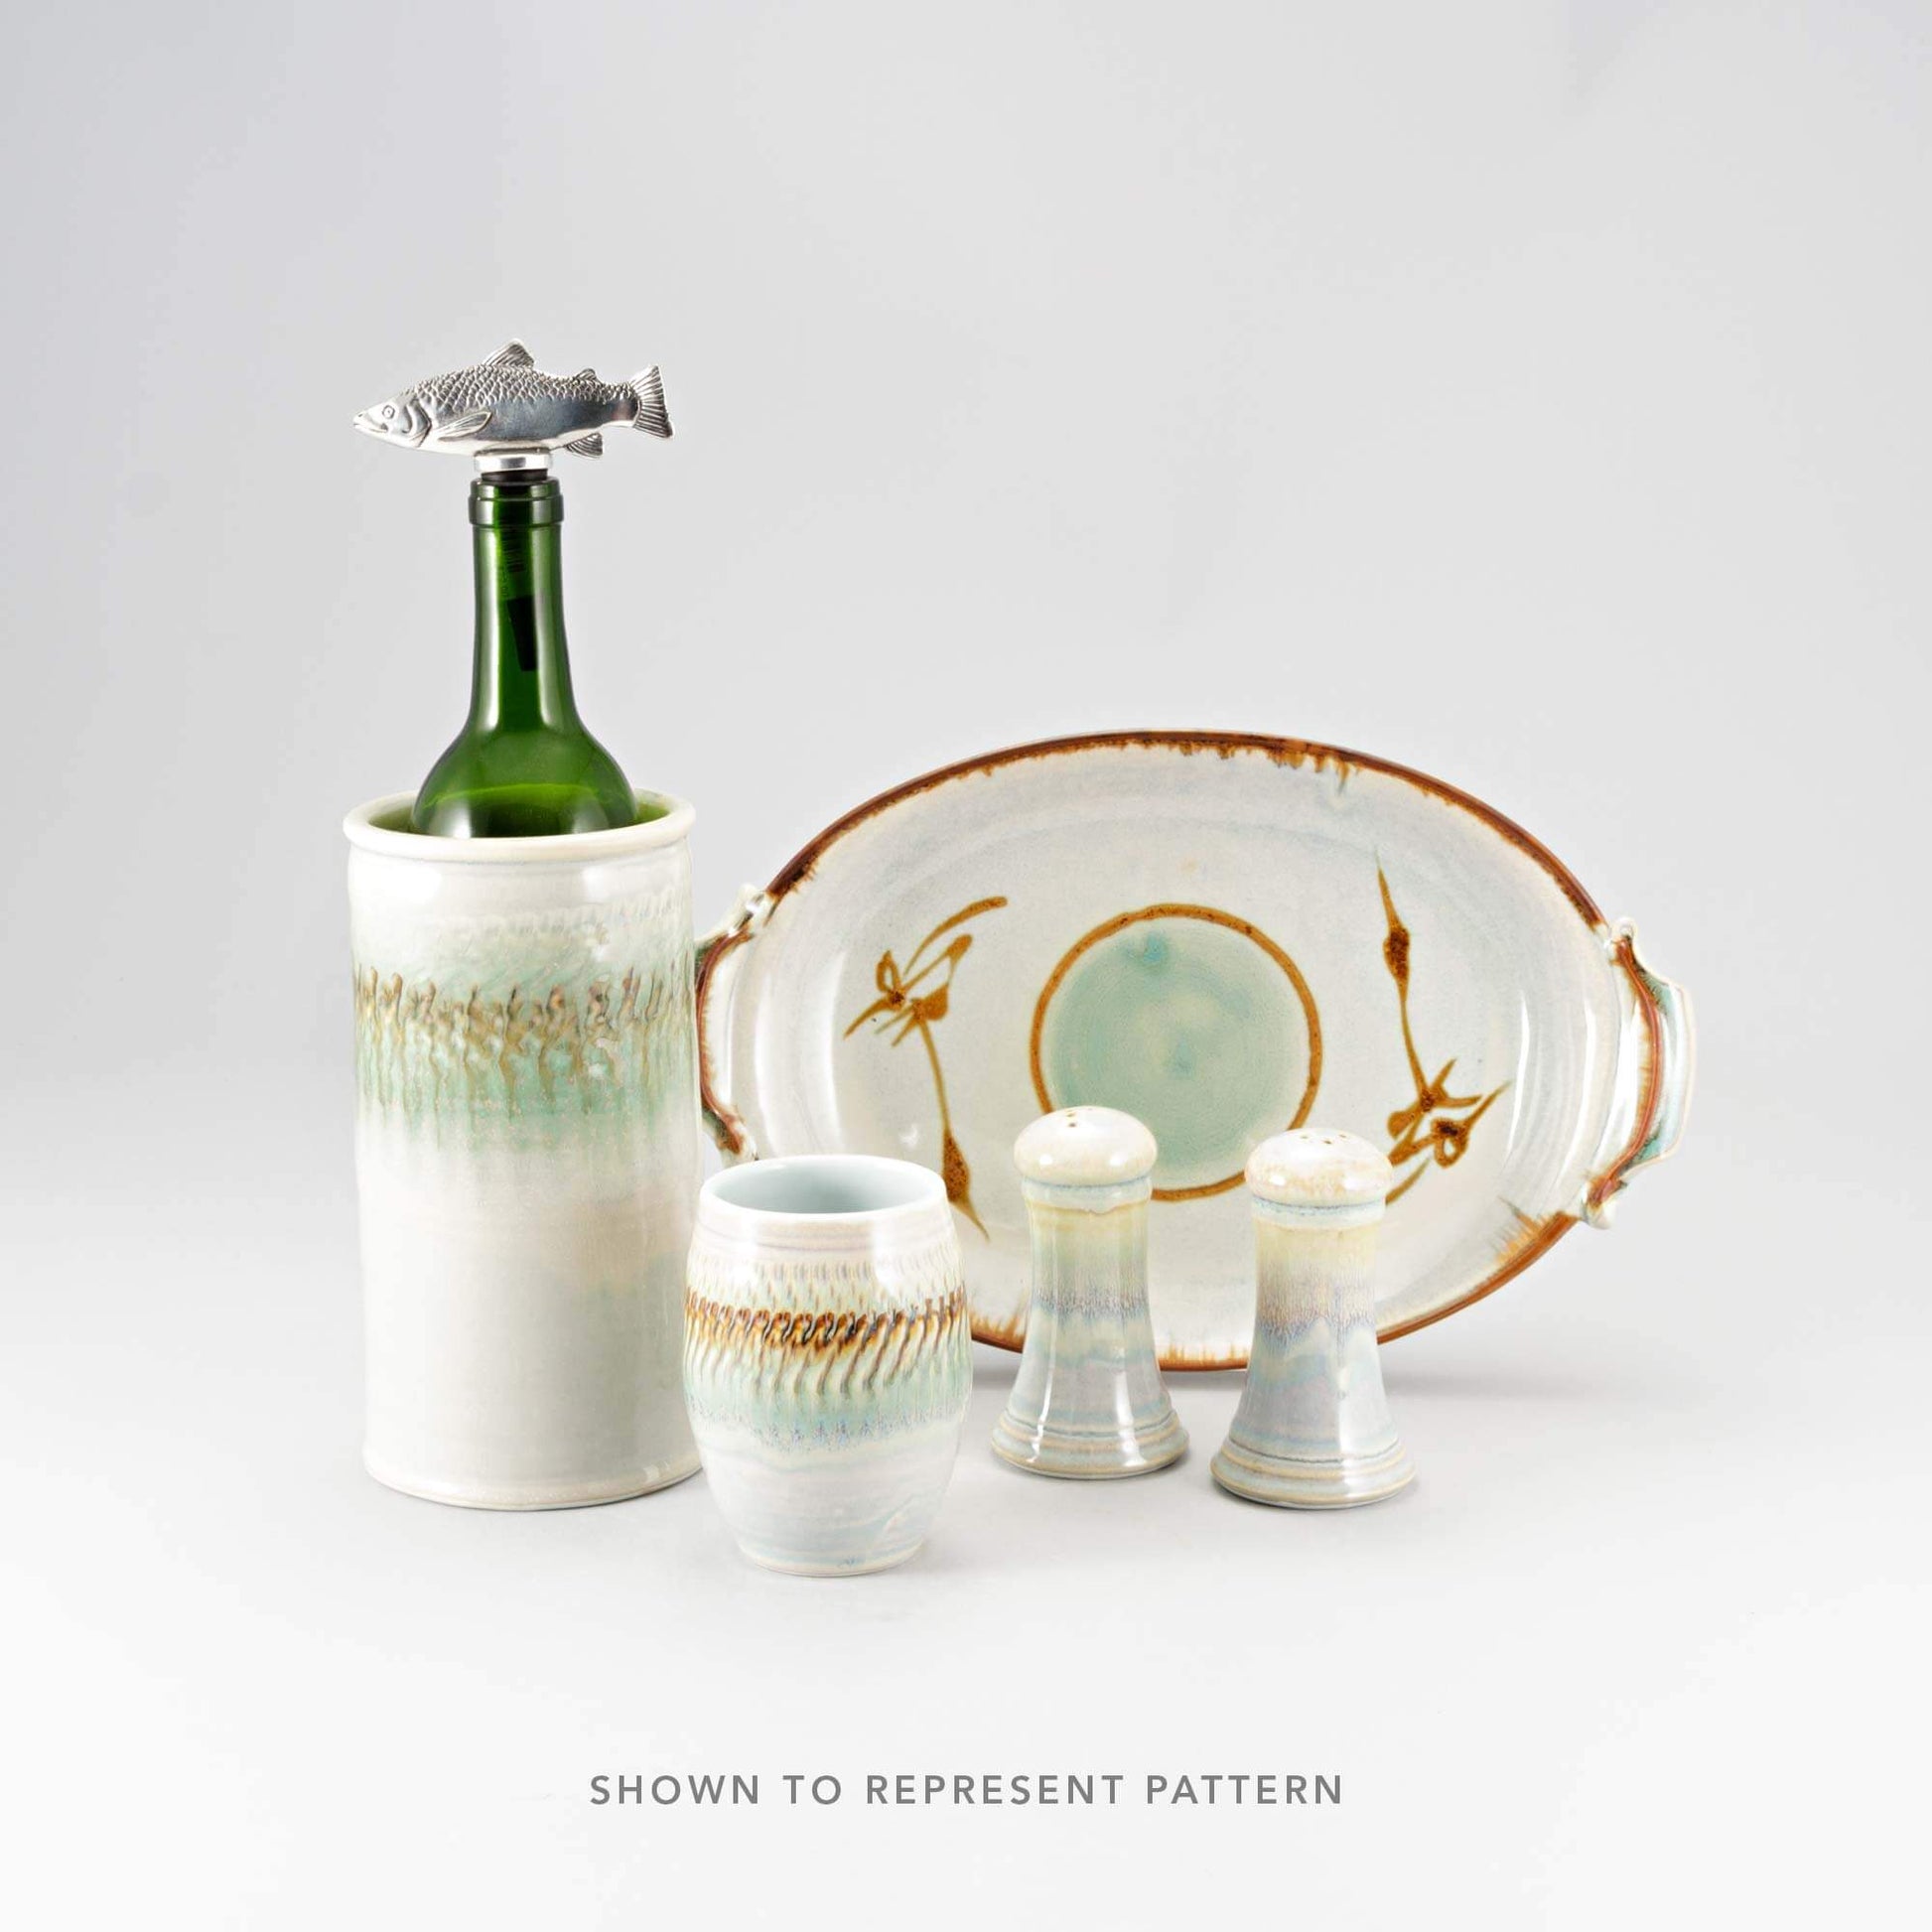 Handmade Pottery Canister Set in Ivory & Green pattern made by Georgetown Pottery in Maine